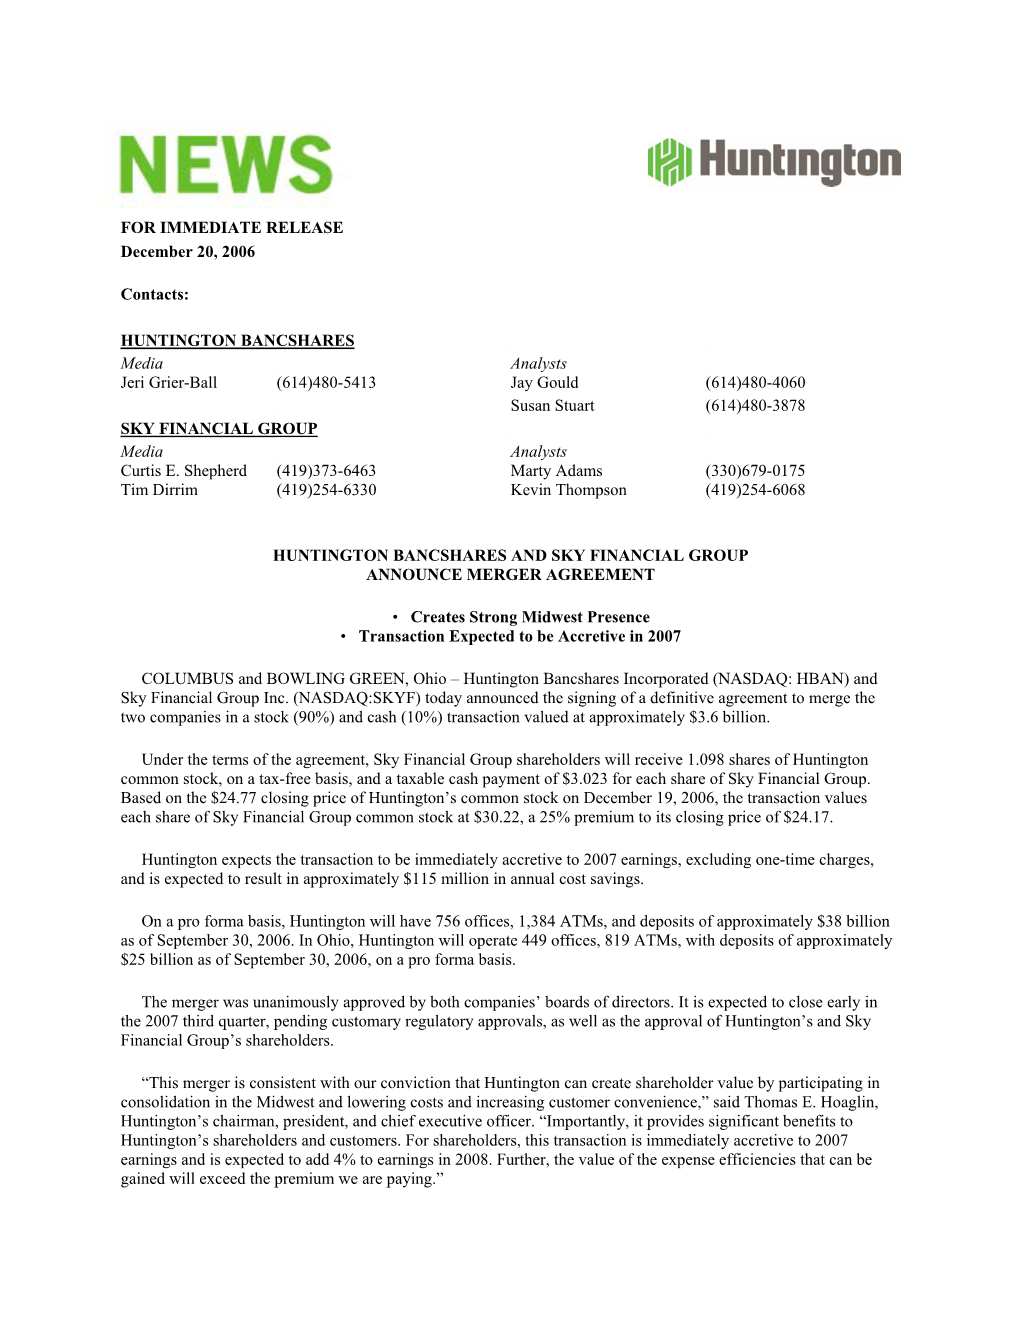 FOR IMMEDIATE RELEASE December 20, 2006 Contacts: HUNTINGTON BANCSHARES Media Analysts Jeri Grier-Ball (614)480-5413 Jay Gould